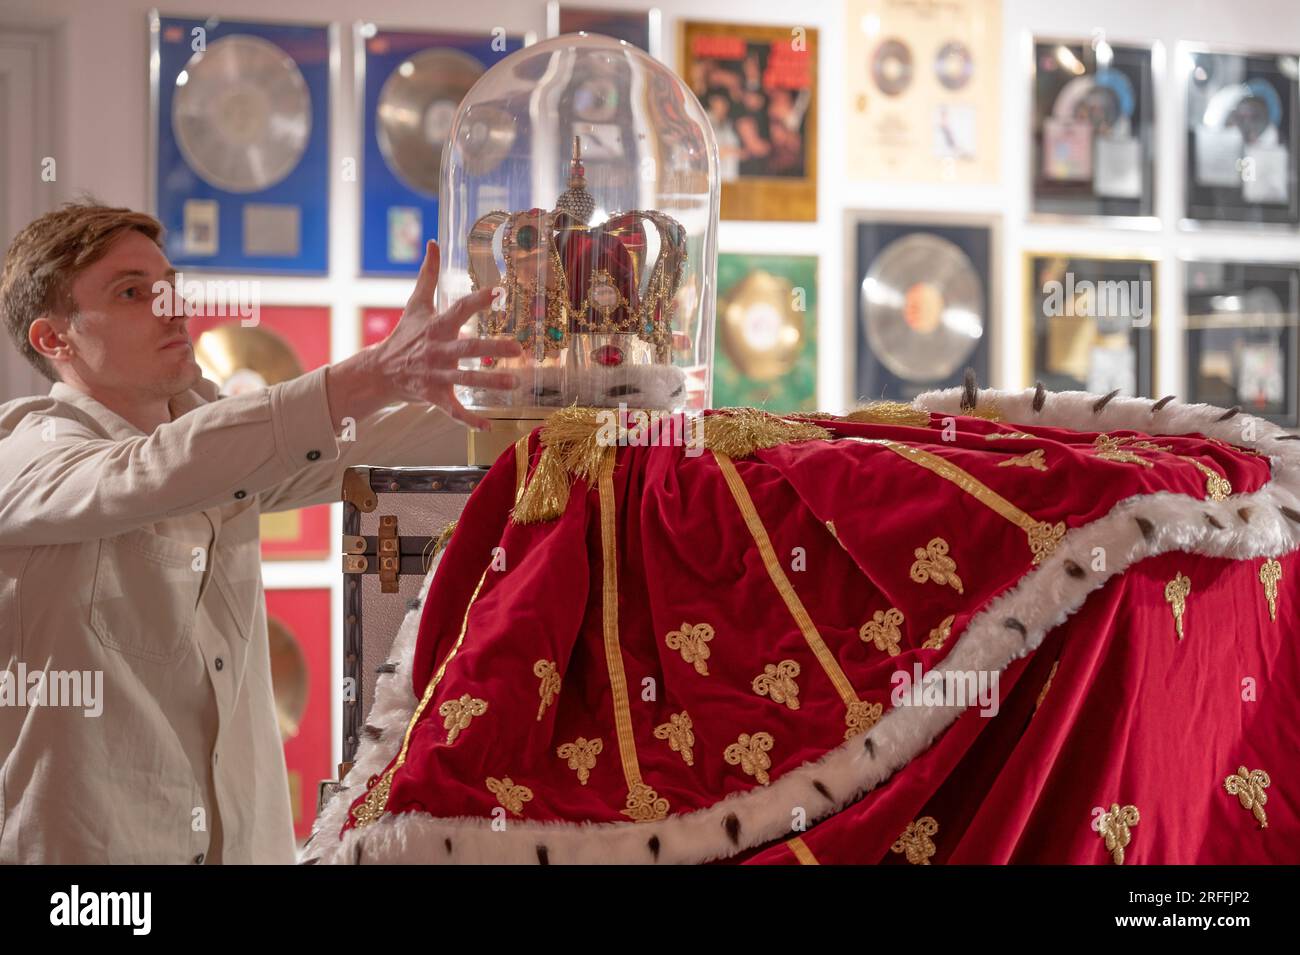 Sotheby's, London, UK. 3 August 2023. An exhibition of the contents of Freddie Mercury's London home filling Sotheby's London Galleries, on view 4 Aug-5 Sept ahead of six dedicated auctions at Sotheby's, London, in September. Image: Freddie Mercury's crown and accompanying cloak, in fake fur, red velvet and rhinestones, made by his friend and costume designer Diana Moseley, thought to be loosely modelled on the coronation crown of the United Kingdom. Indelibly linked to Mercury, they were worn for the finale rendition of “God Save The Queen” during his last tour with Queen, ‘The Magic Tour', w Stock Photo